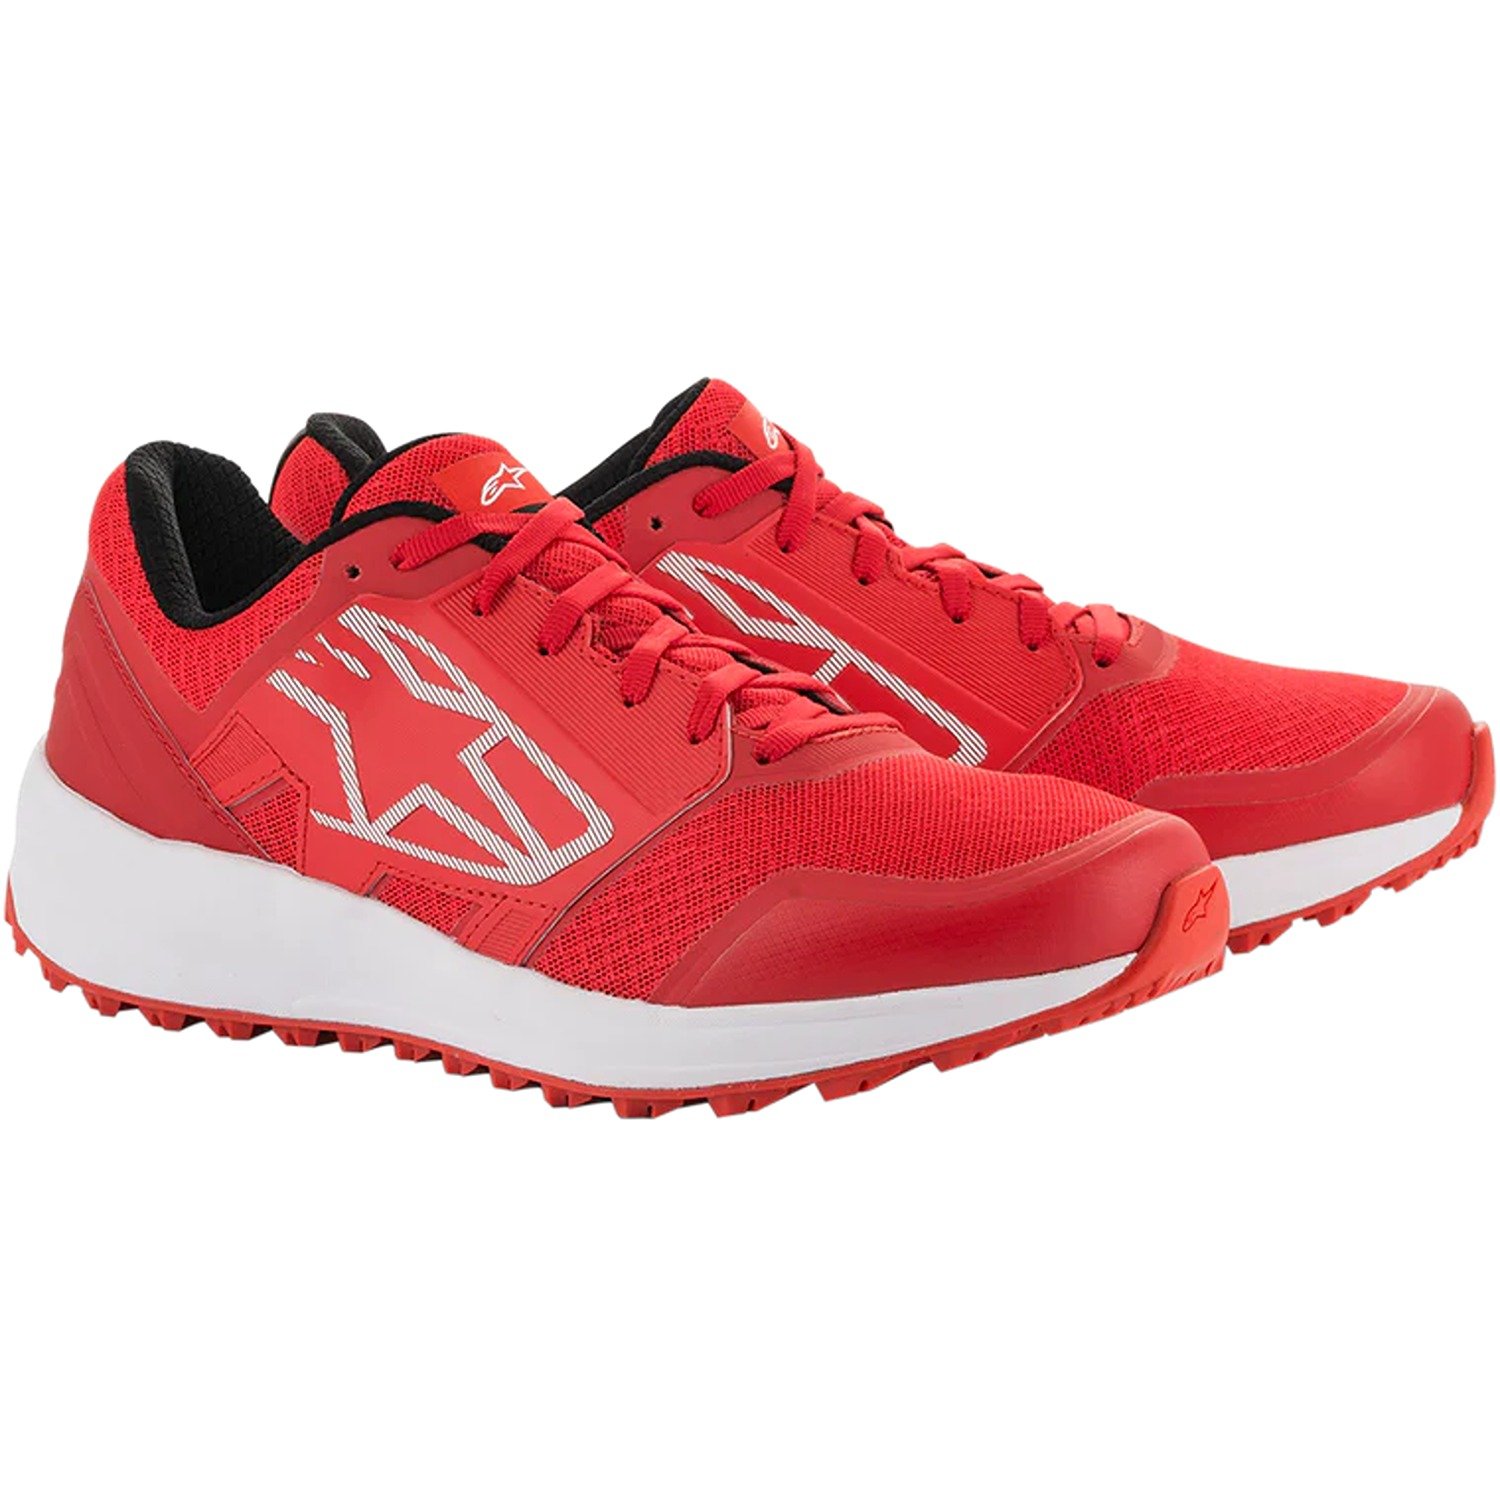 Image of Alpinestars Meta Trail Shoes Red White Size US 75 ID 8059175107702